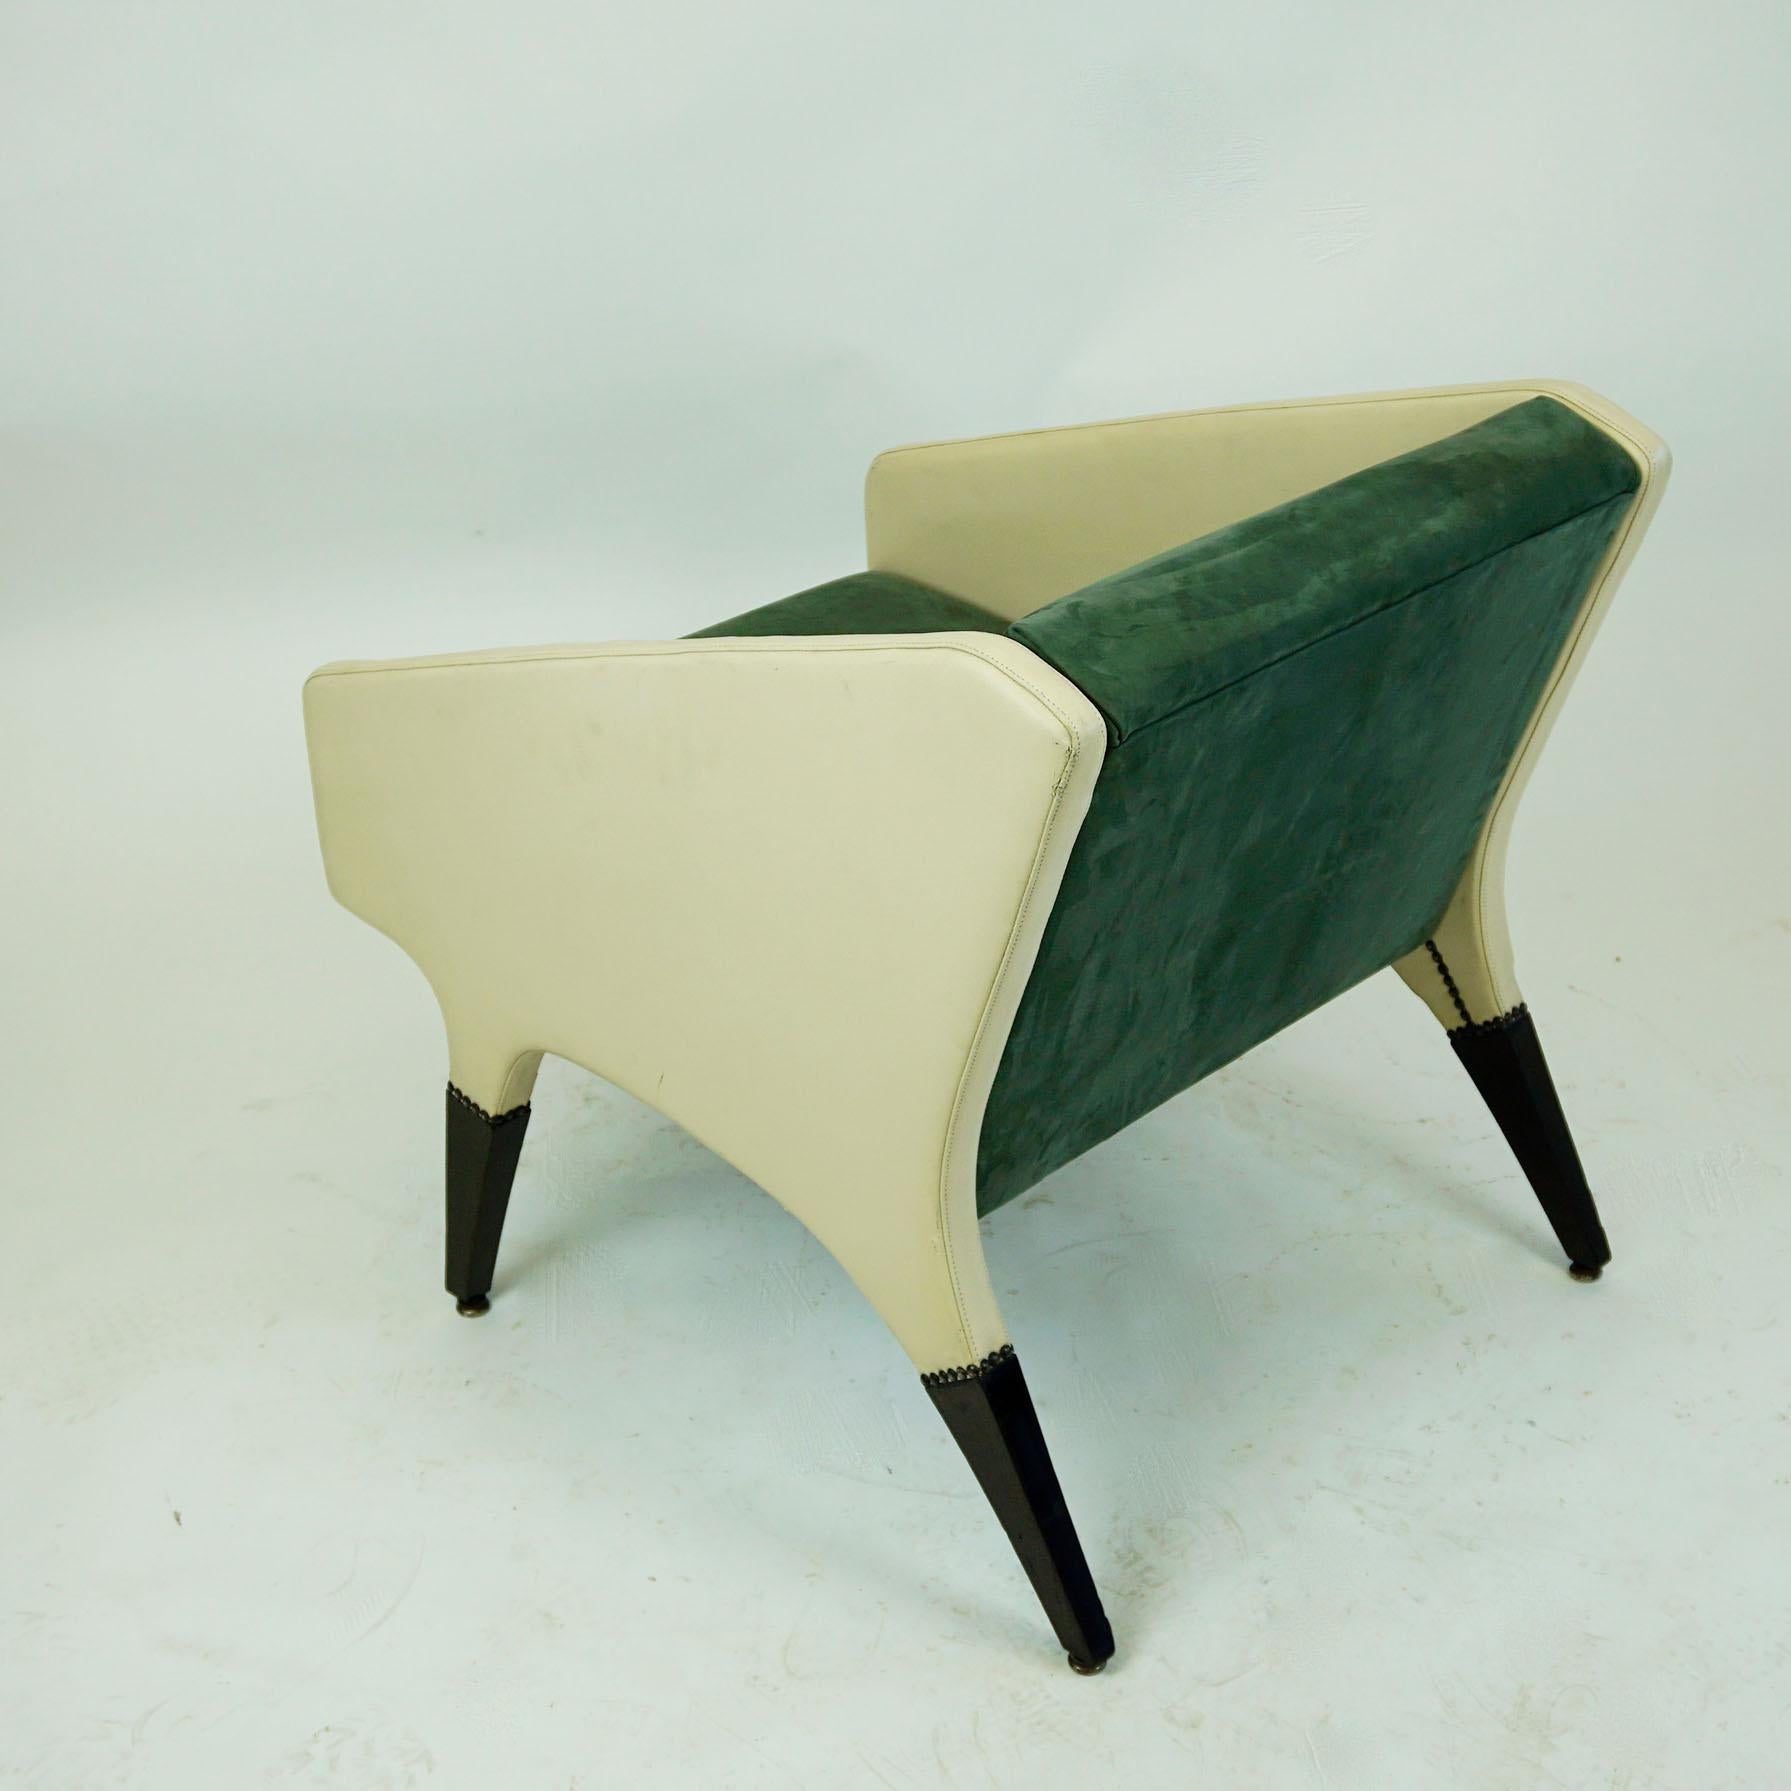 Italian Midcentury Parco dei Principi Lounge Chair by Gio Ponti for Cassina 3